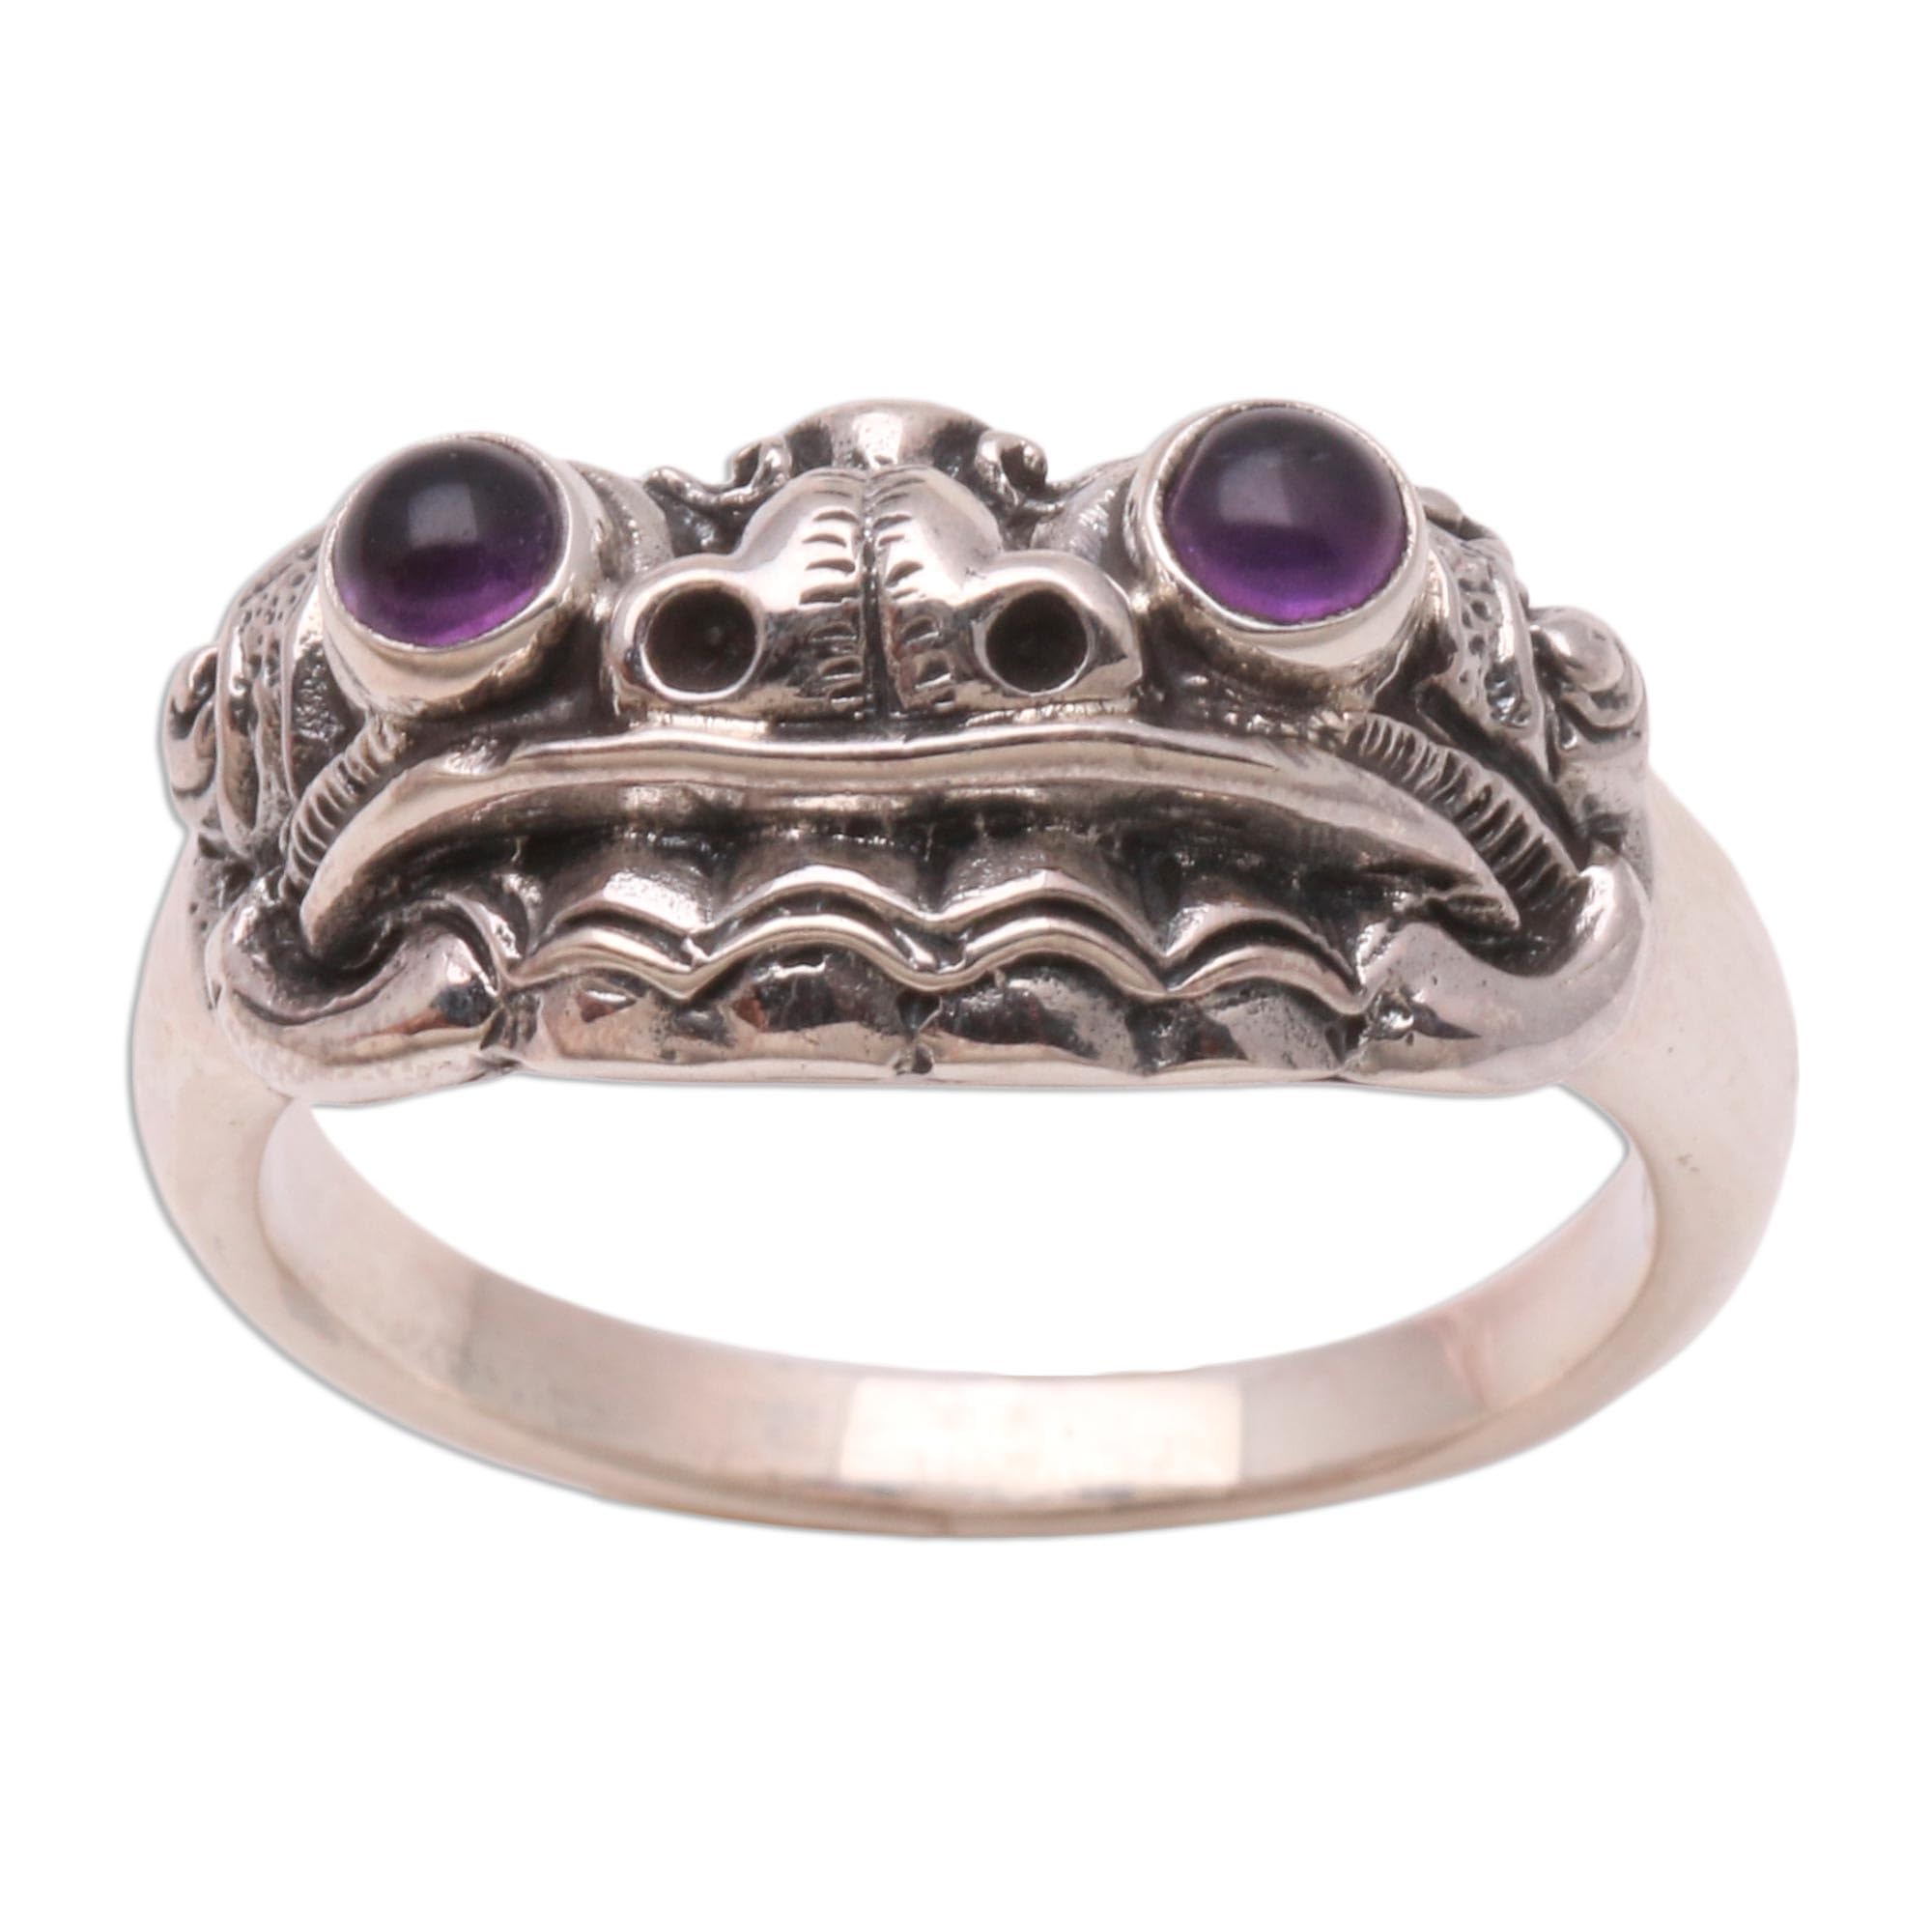 NOVICA Artisan Handmade Men's Amethyst Ring Artisan Crafted .925 Sterling Silver Purple Band Indonesia Animal Themed Birthstone Balinese Traditional Dragon 'Immortal Eclipse'